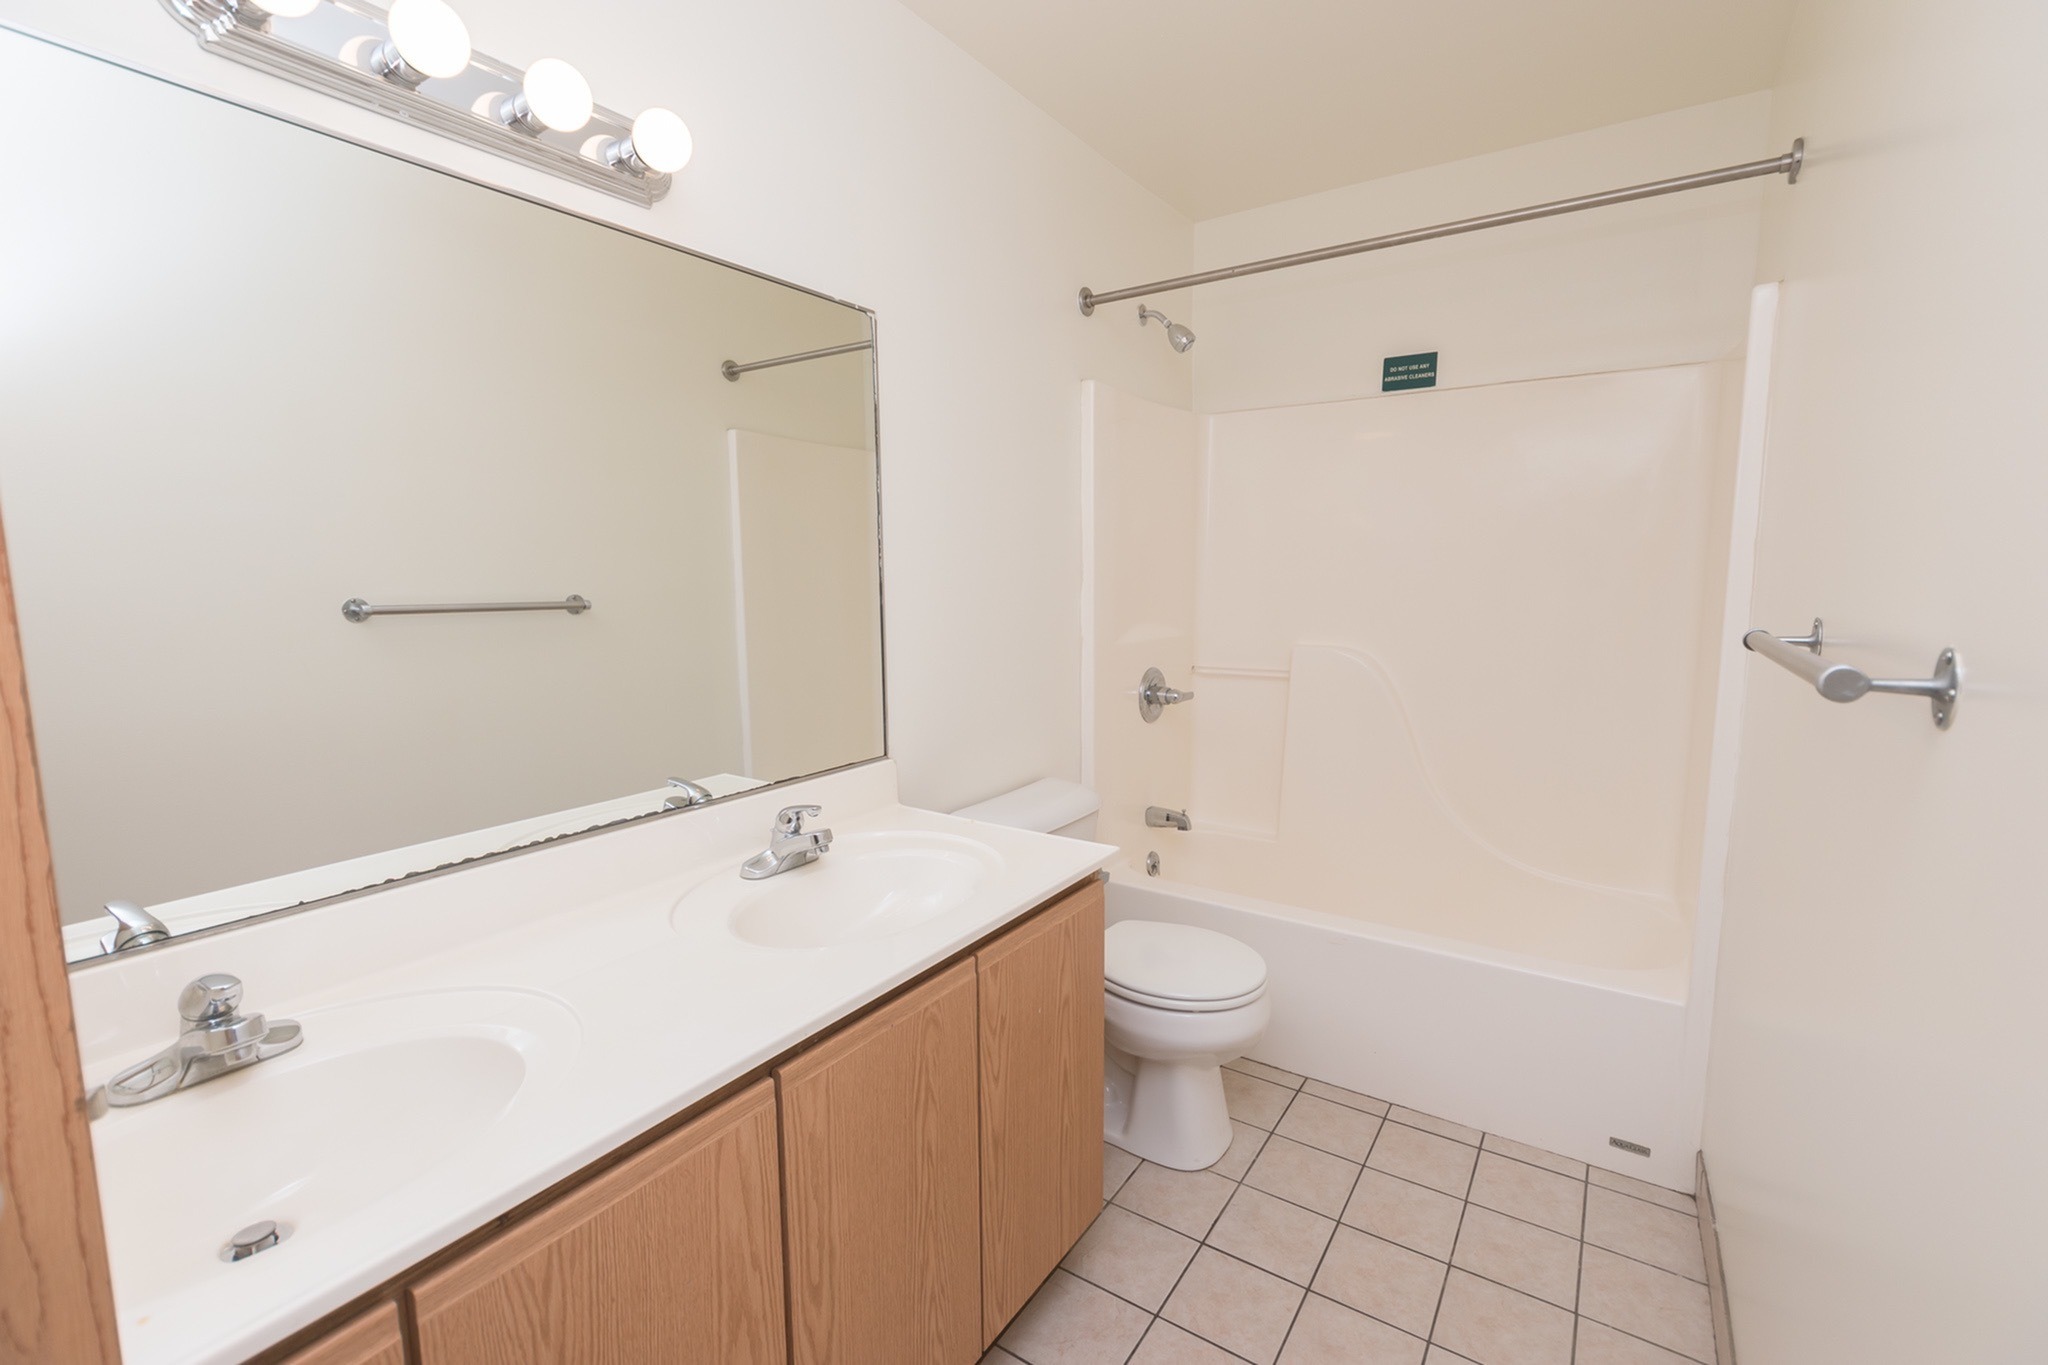 Spacious bathroom with a large mirror, two sinks, vanity lights, a toilet, and a bathtub.